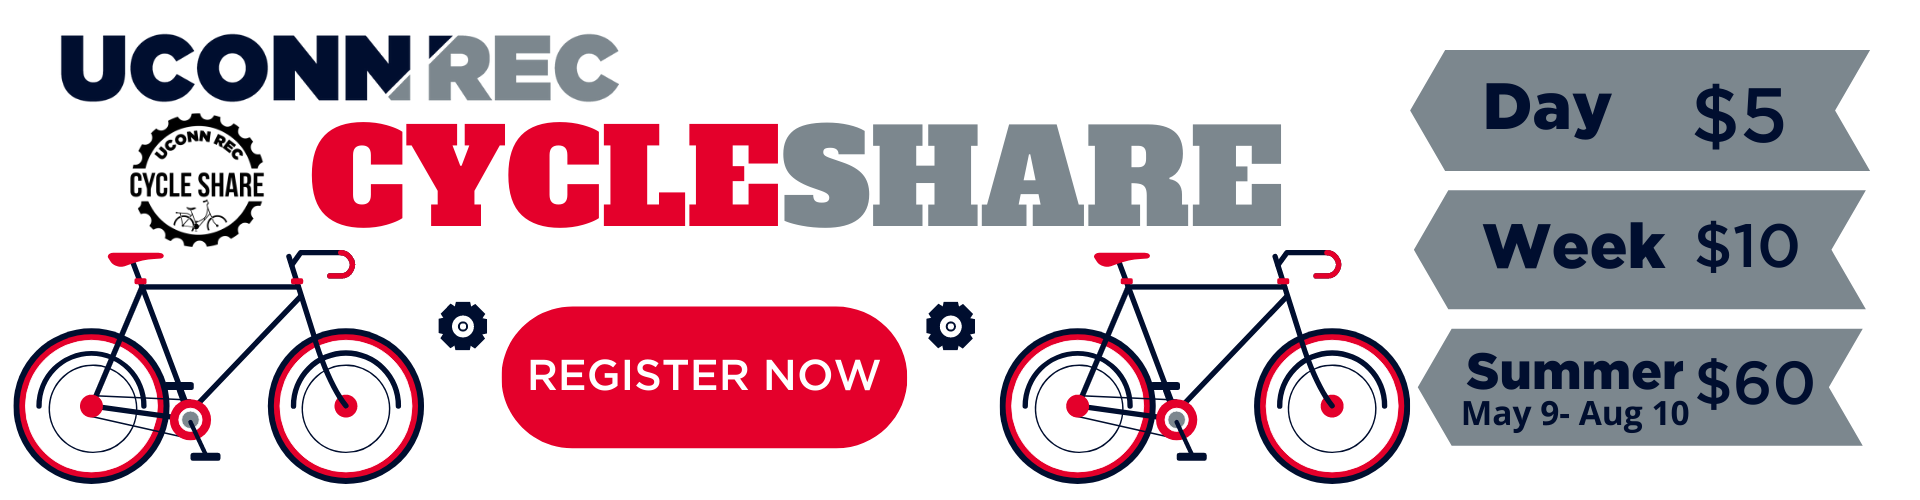 Cycle Share